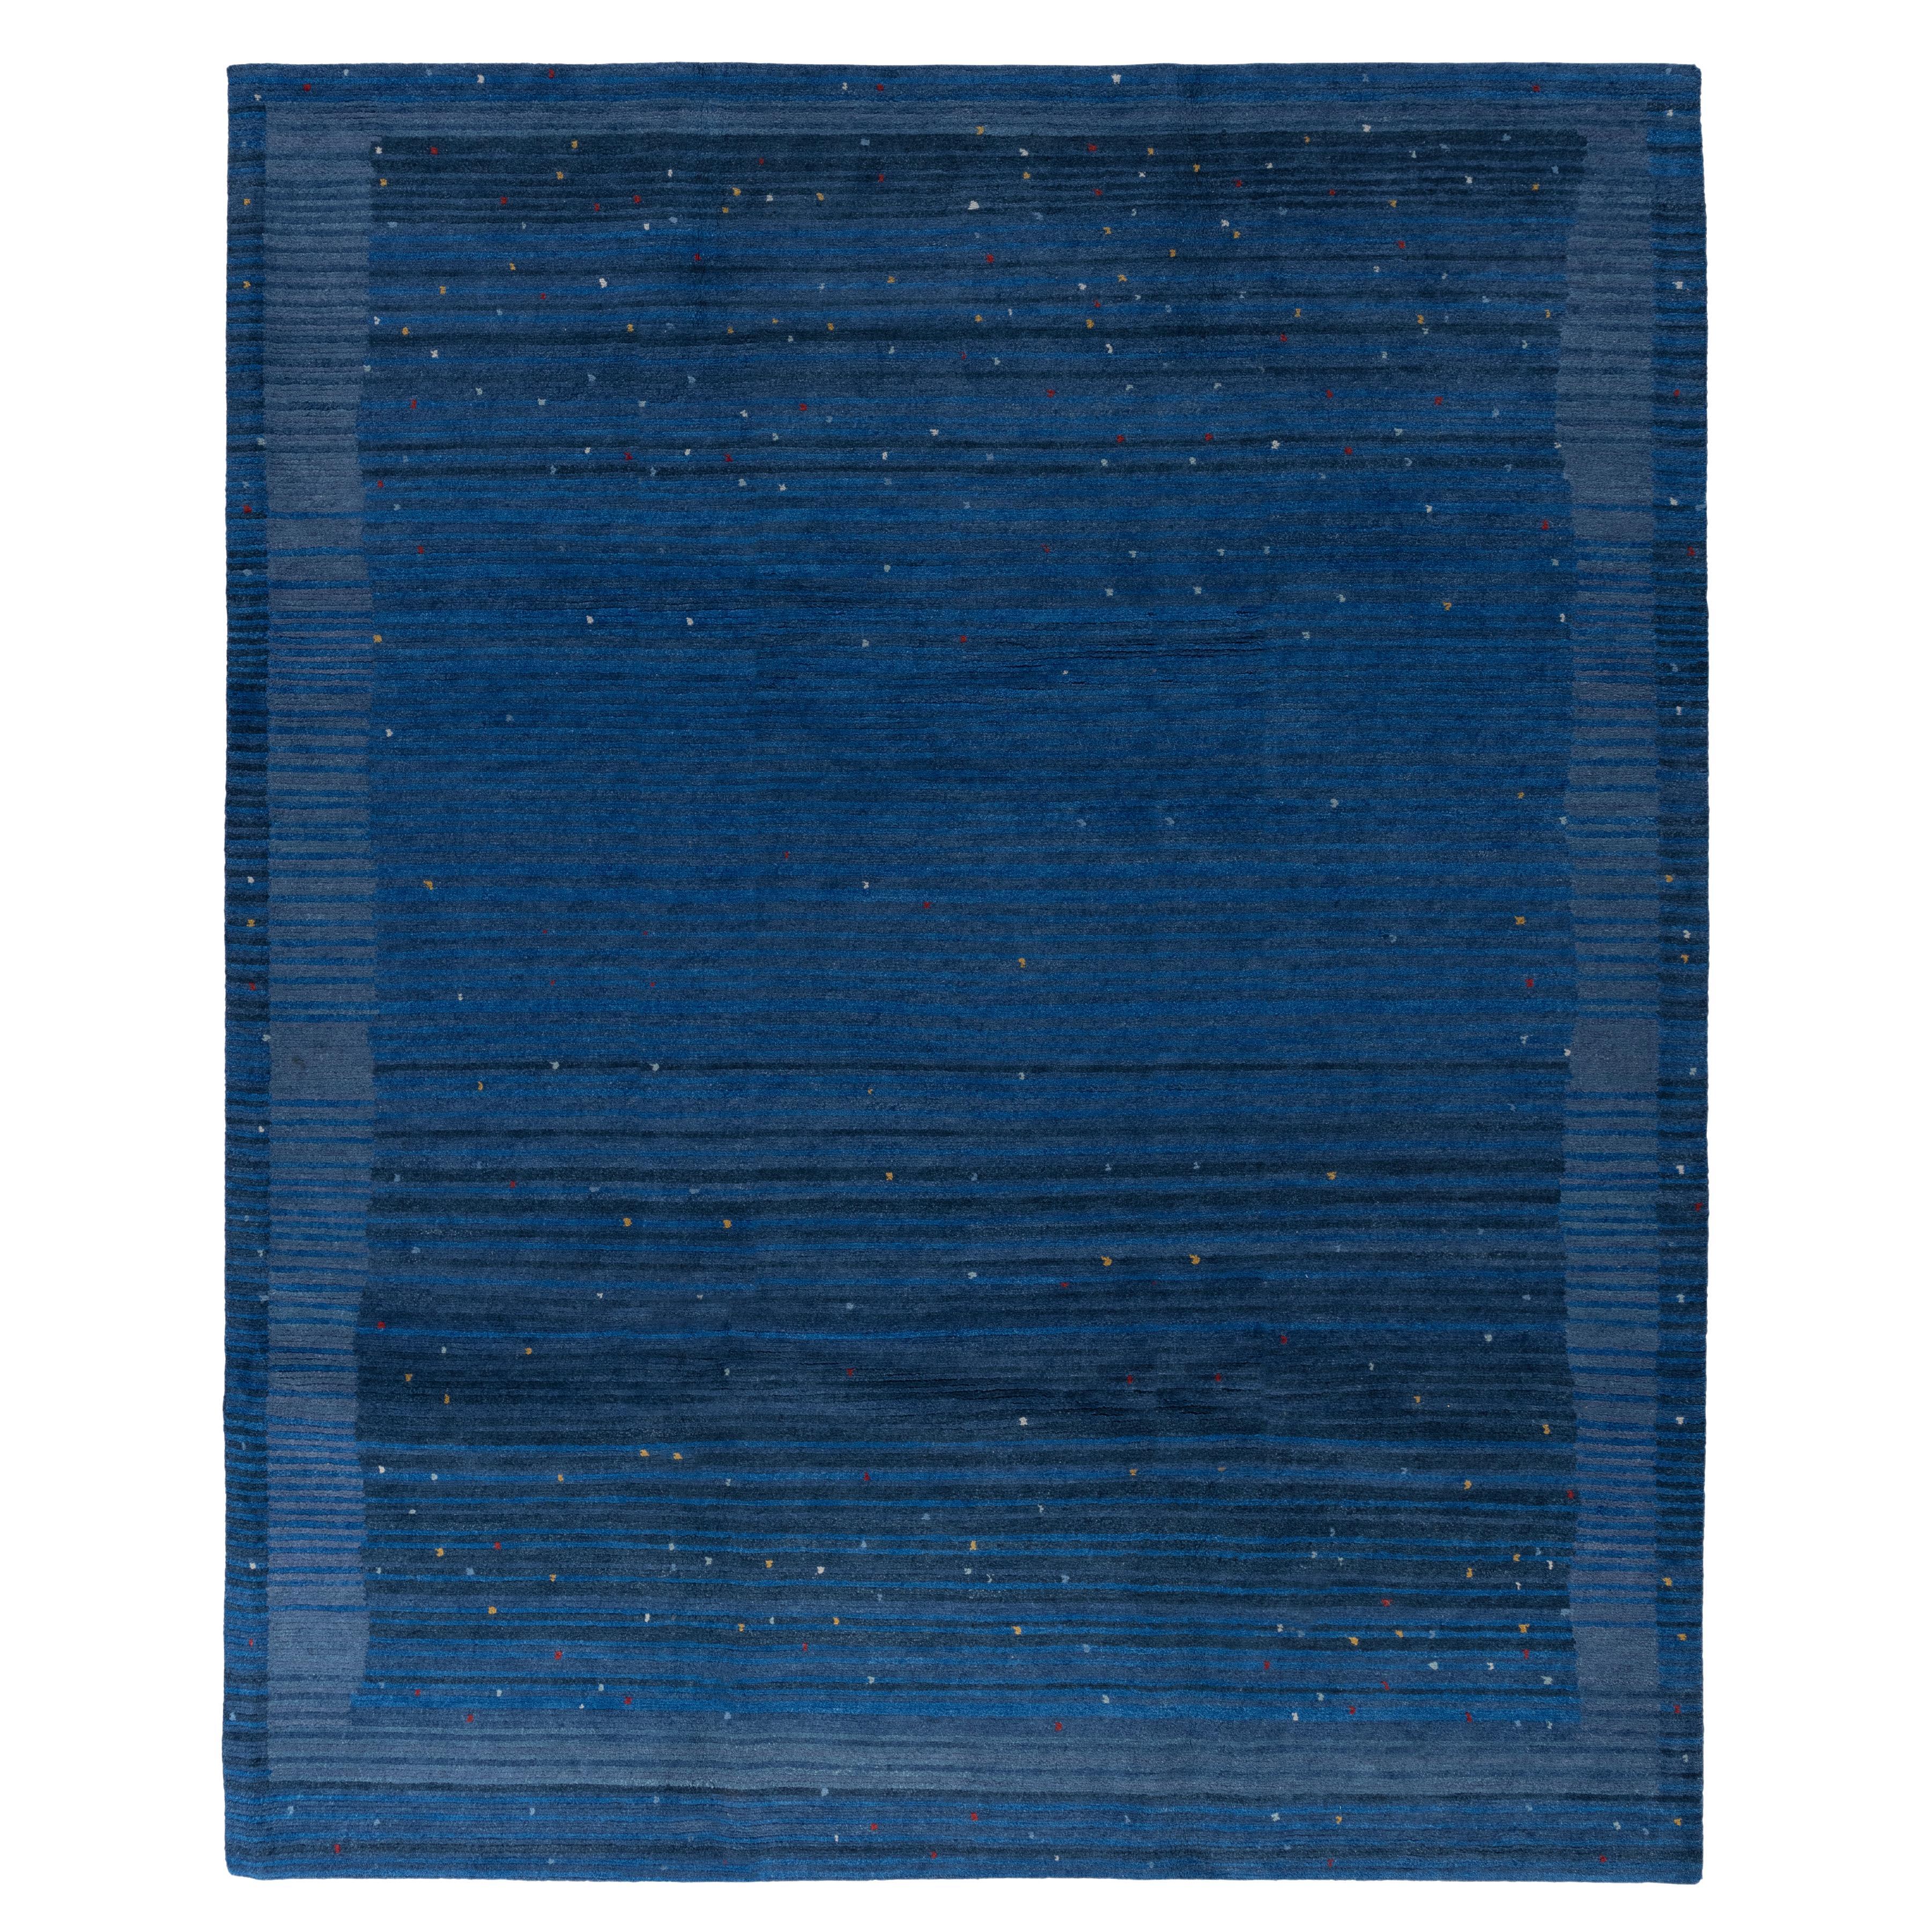 Serenity Indigo 8X10, Bordered Rugs, Geometric, Solids/Textures, Transitional For Sale